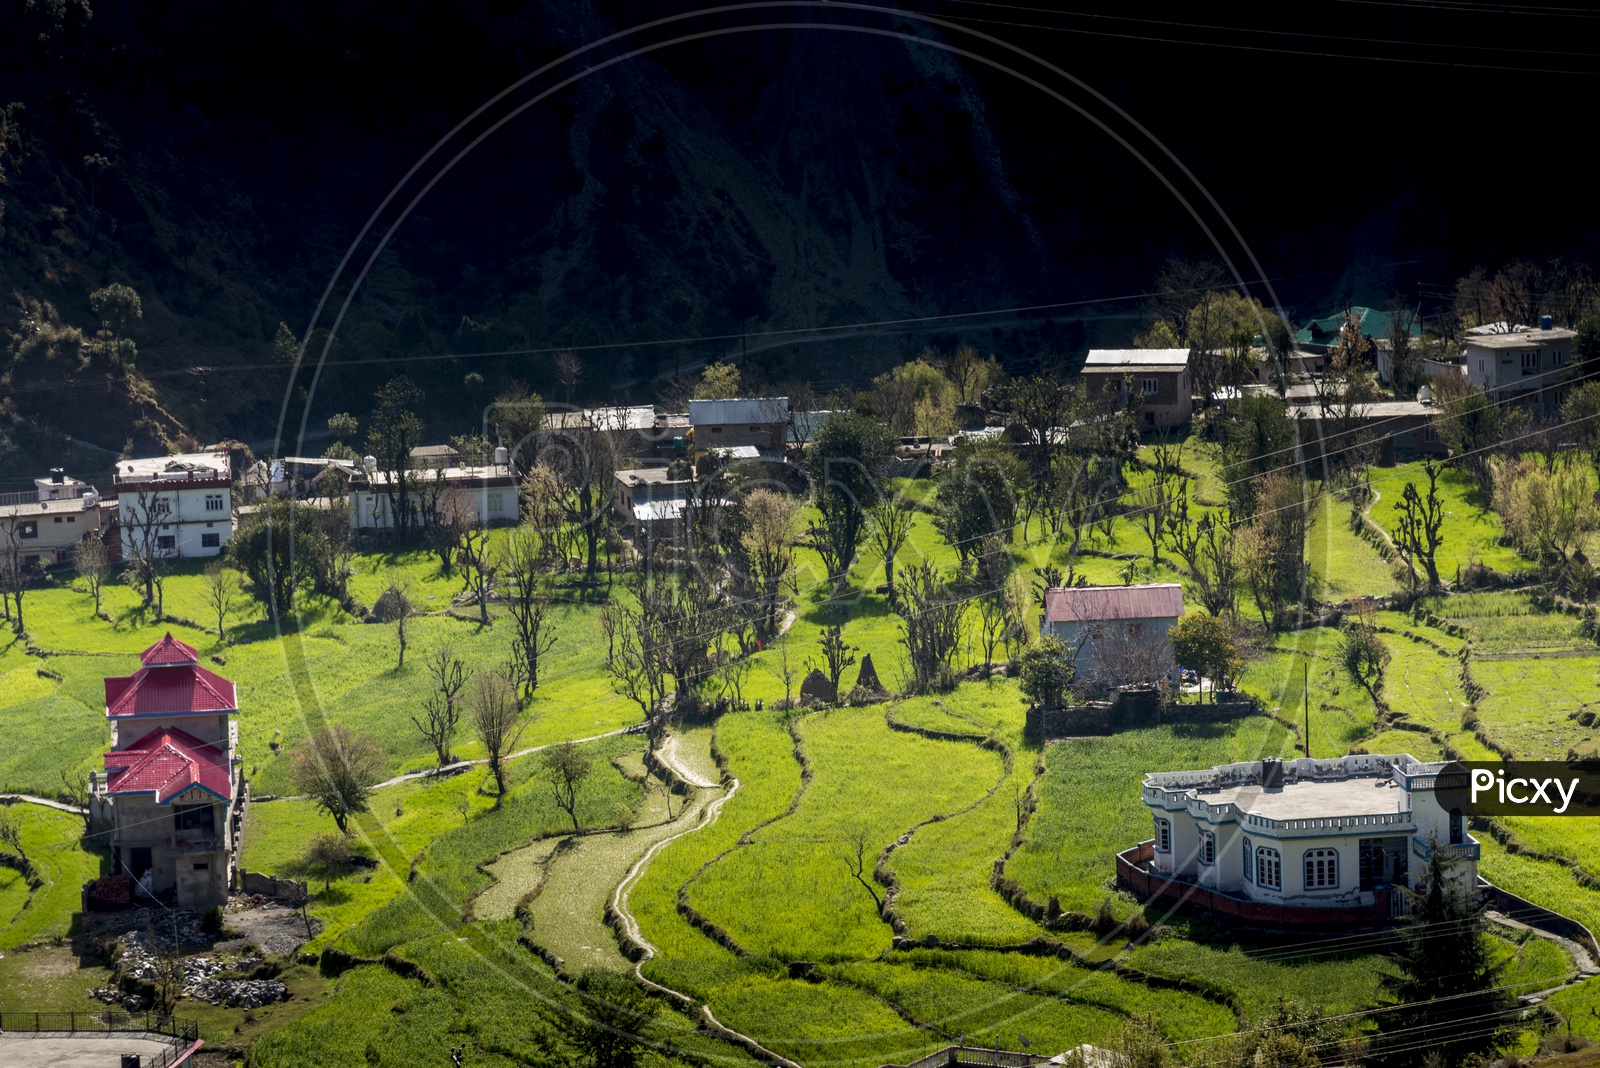 Houses surrounded by greenery in Chamba, Himachal Pradesh